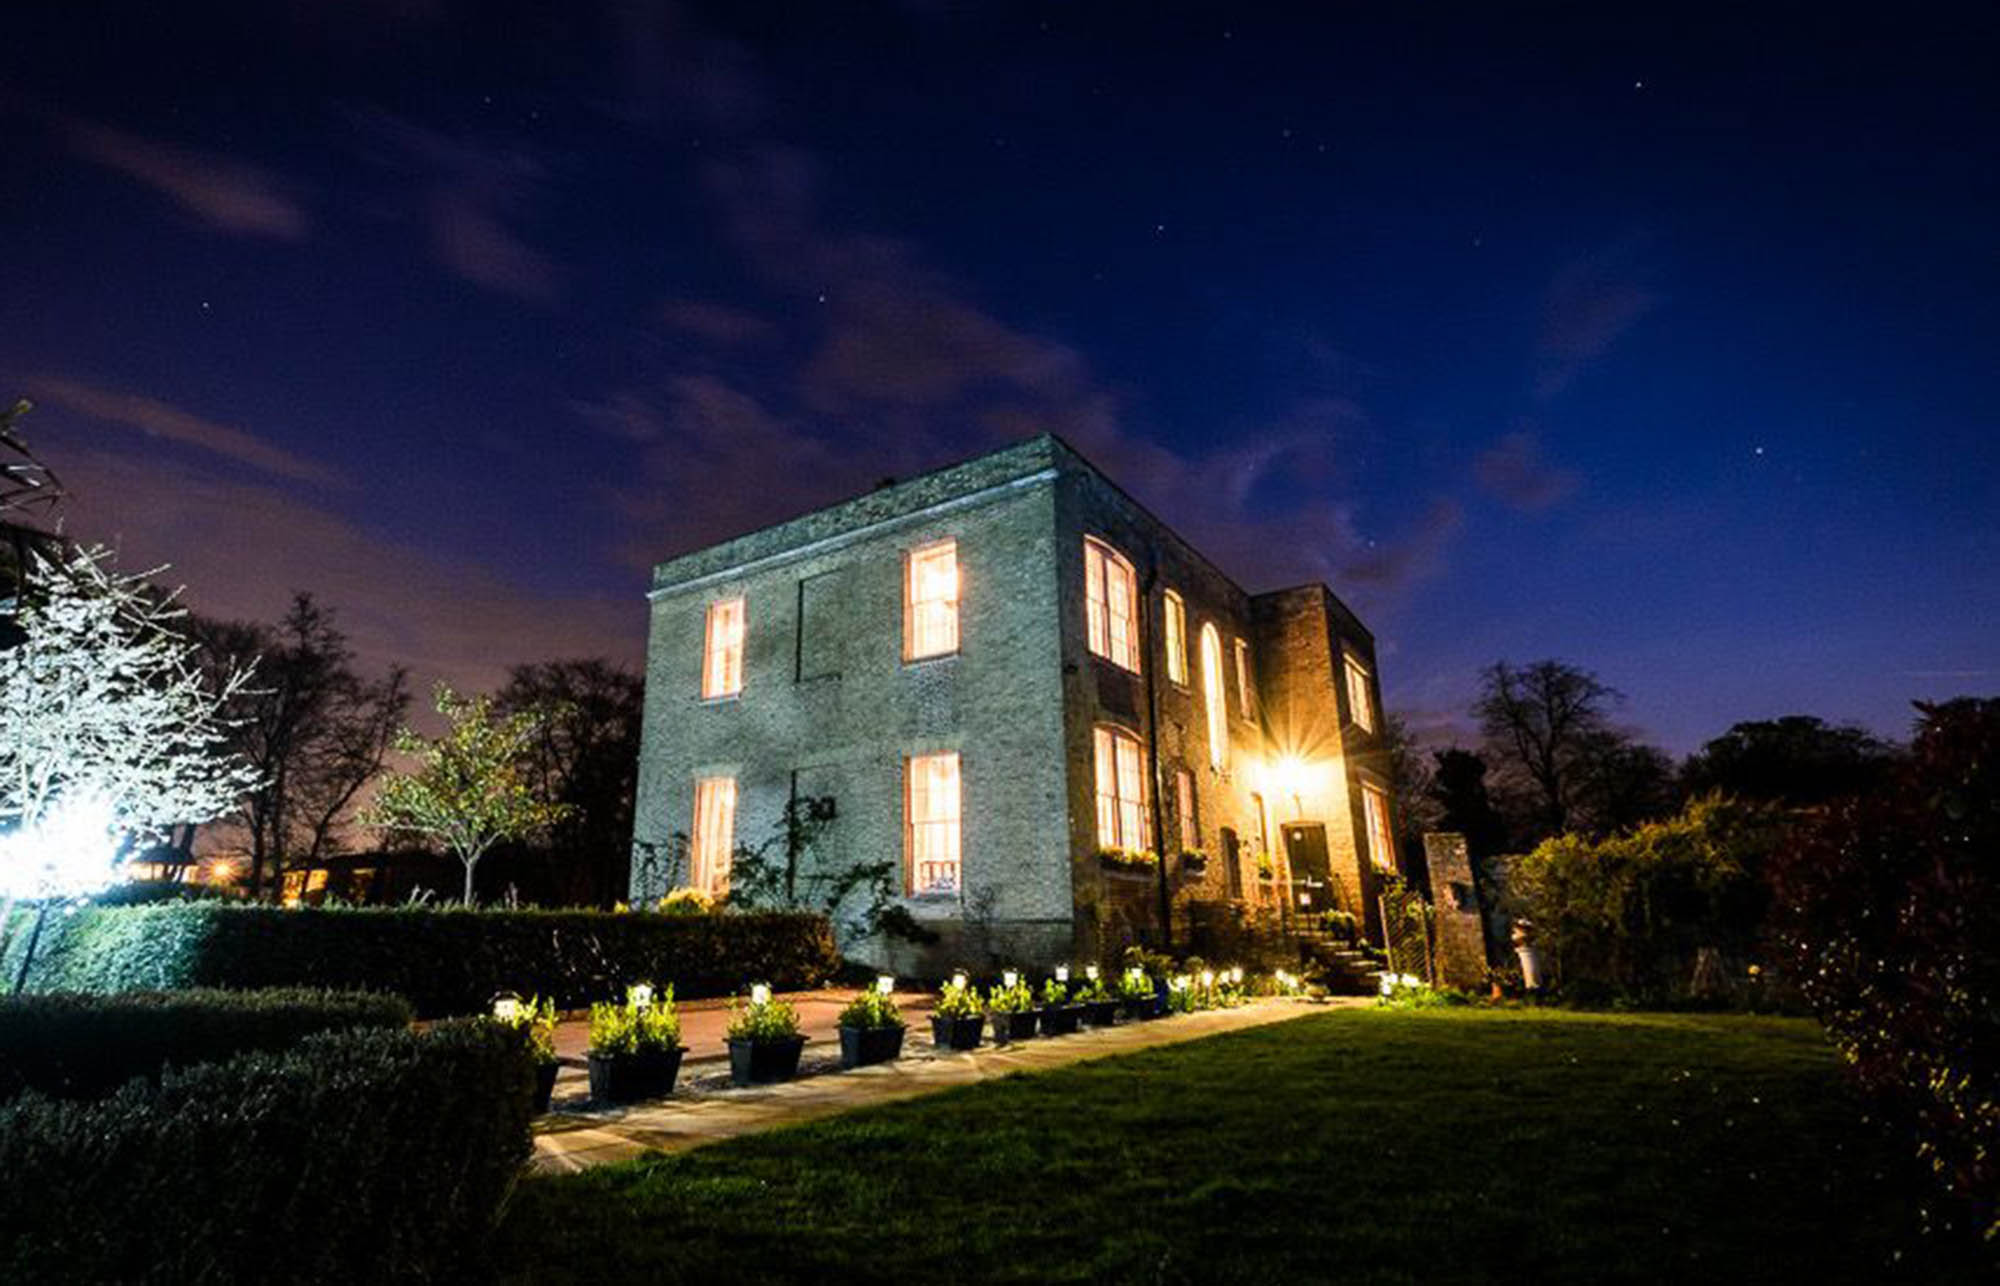 Bedfordshire manor house wedding venue Shortmead 1Bedfordshire manor house wedding venue Shortmead beautifully lit at night